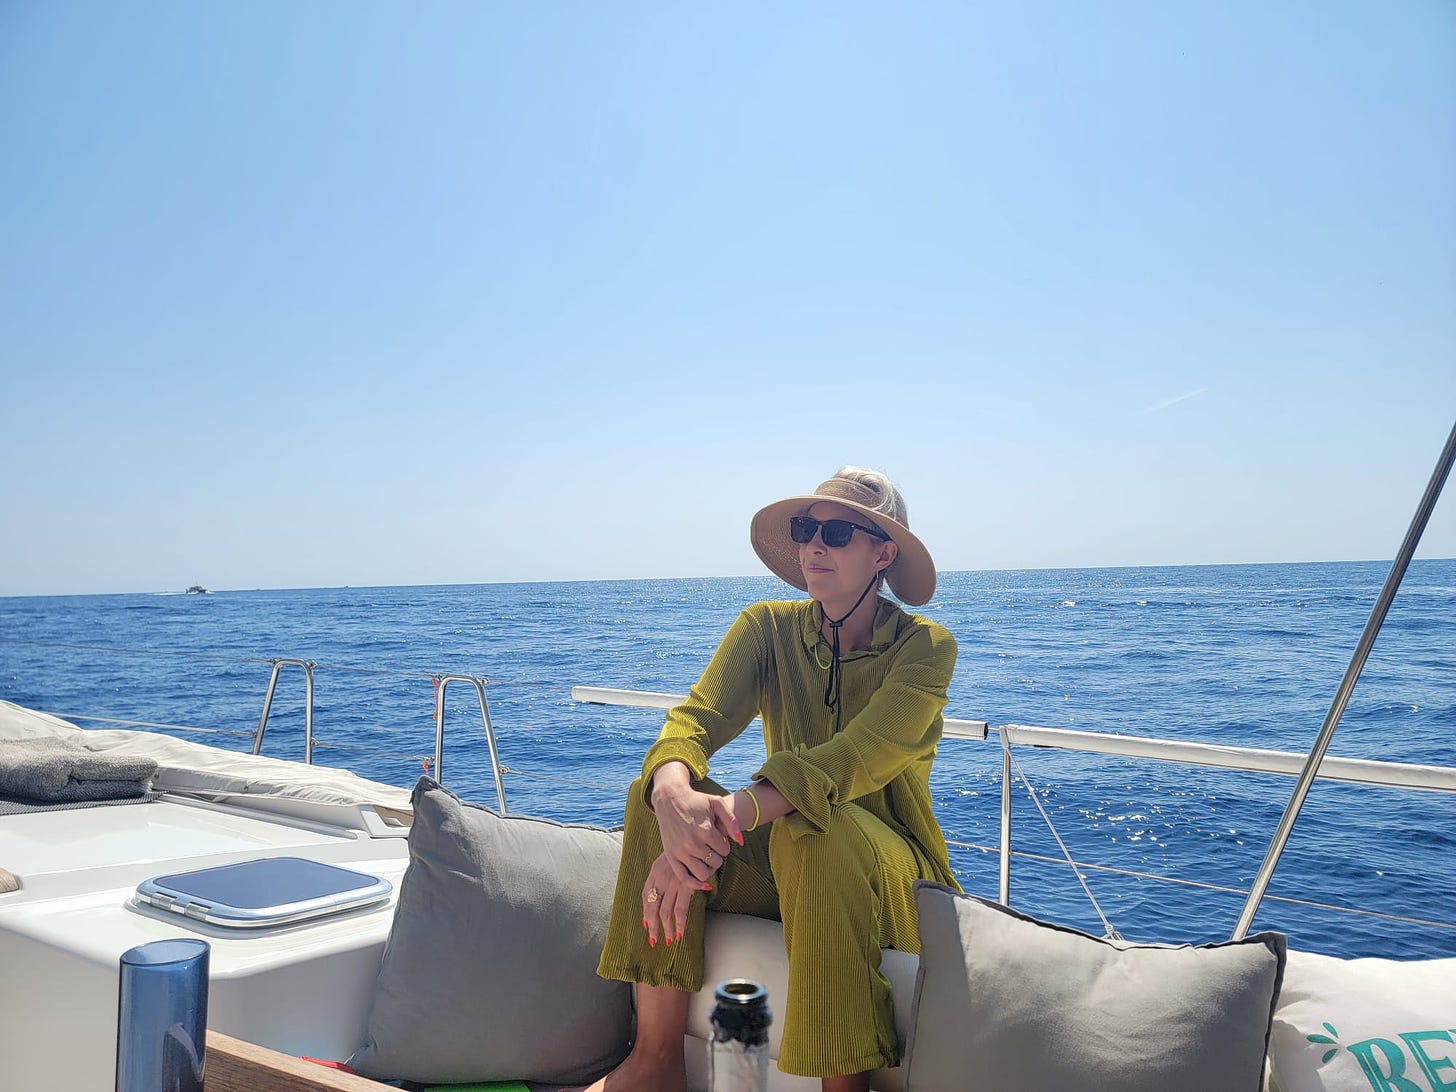 The author sits on a sailboat in a lime pants and shirt, sunglasses, and a sun hat. A cobalt blue ocean stretches behind her.